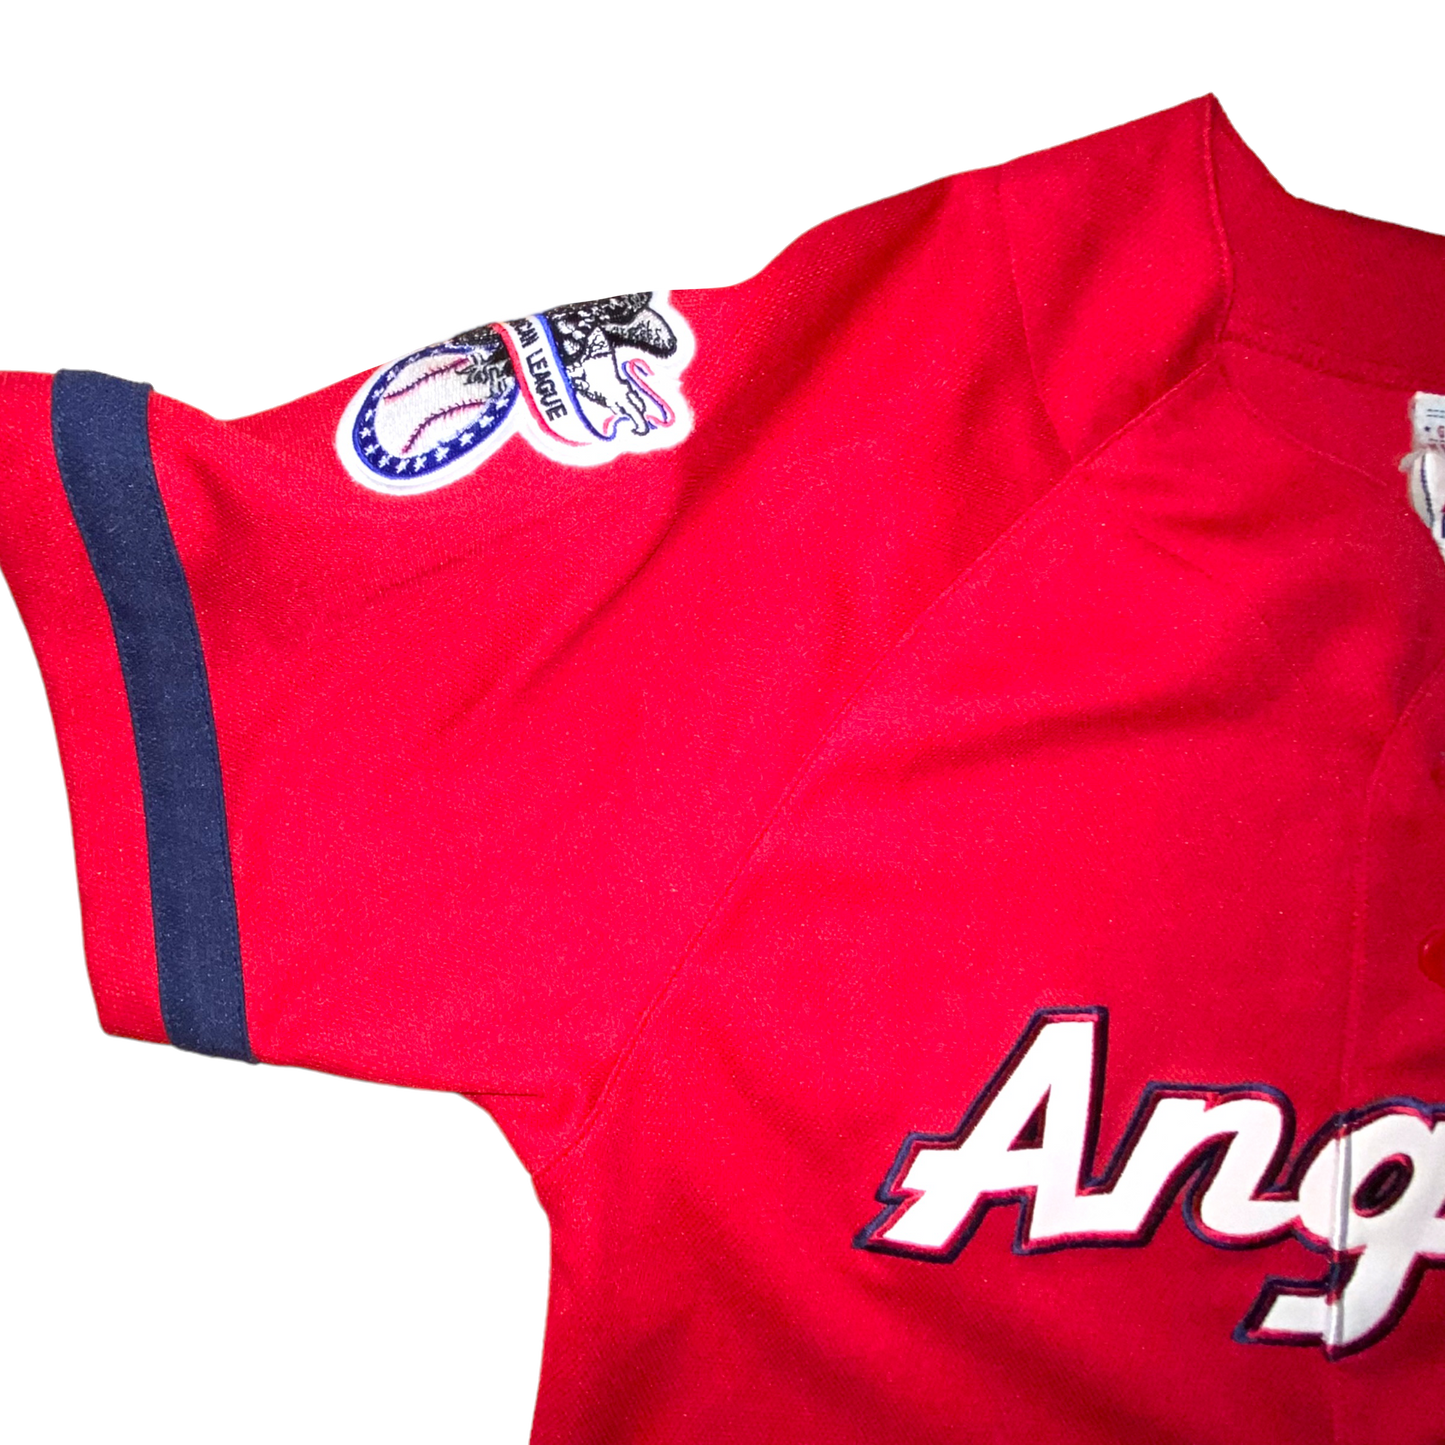 Majestic - Angels Red Youth Vintage Baseball Jersey